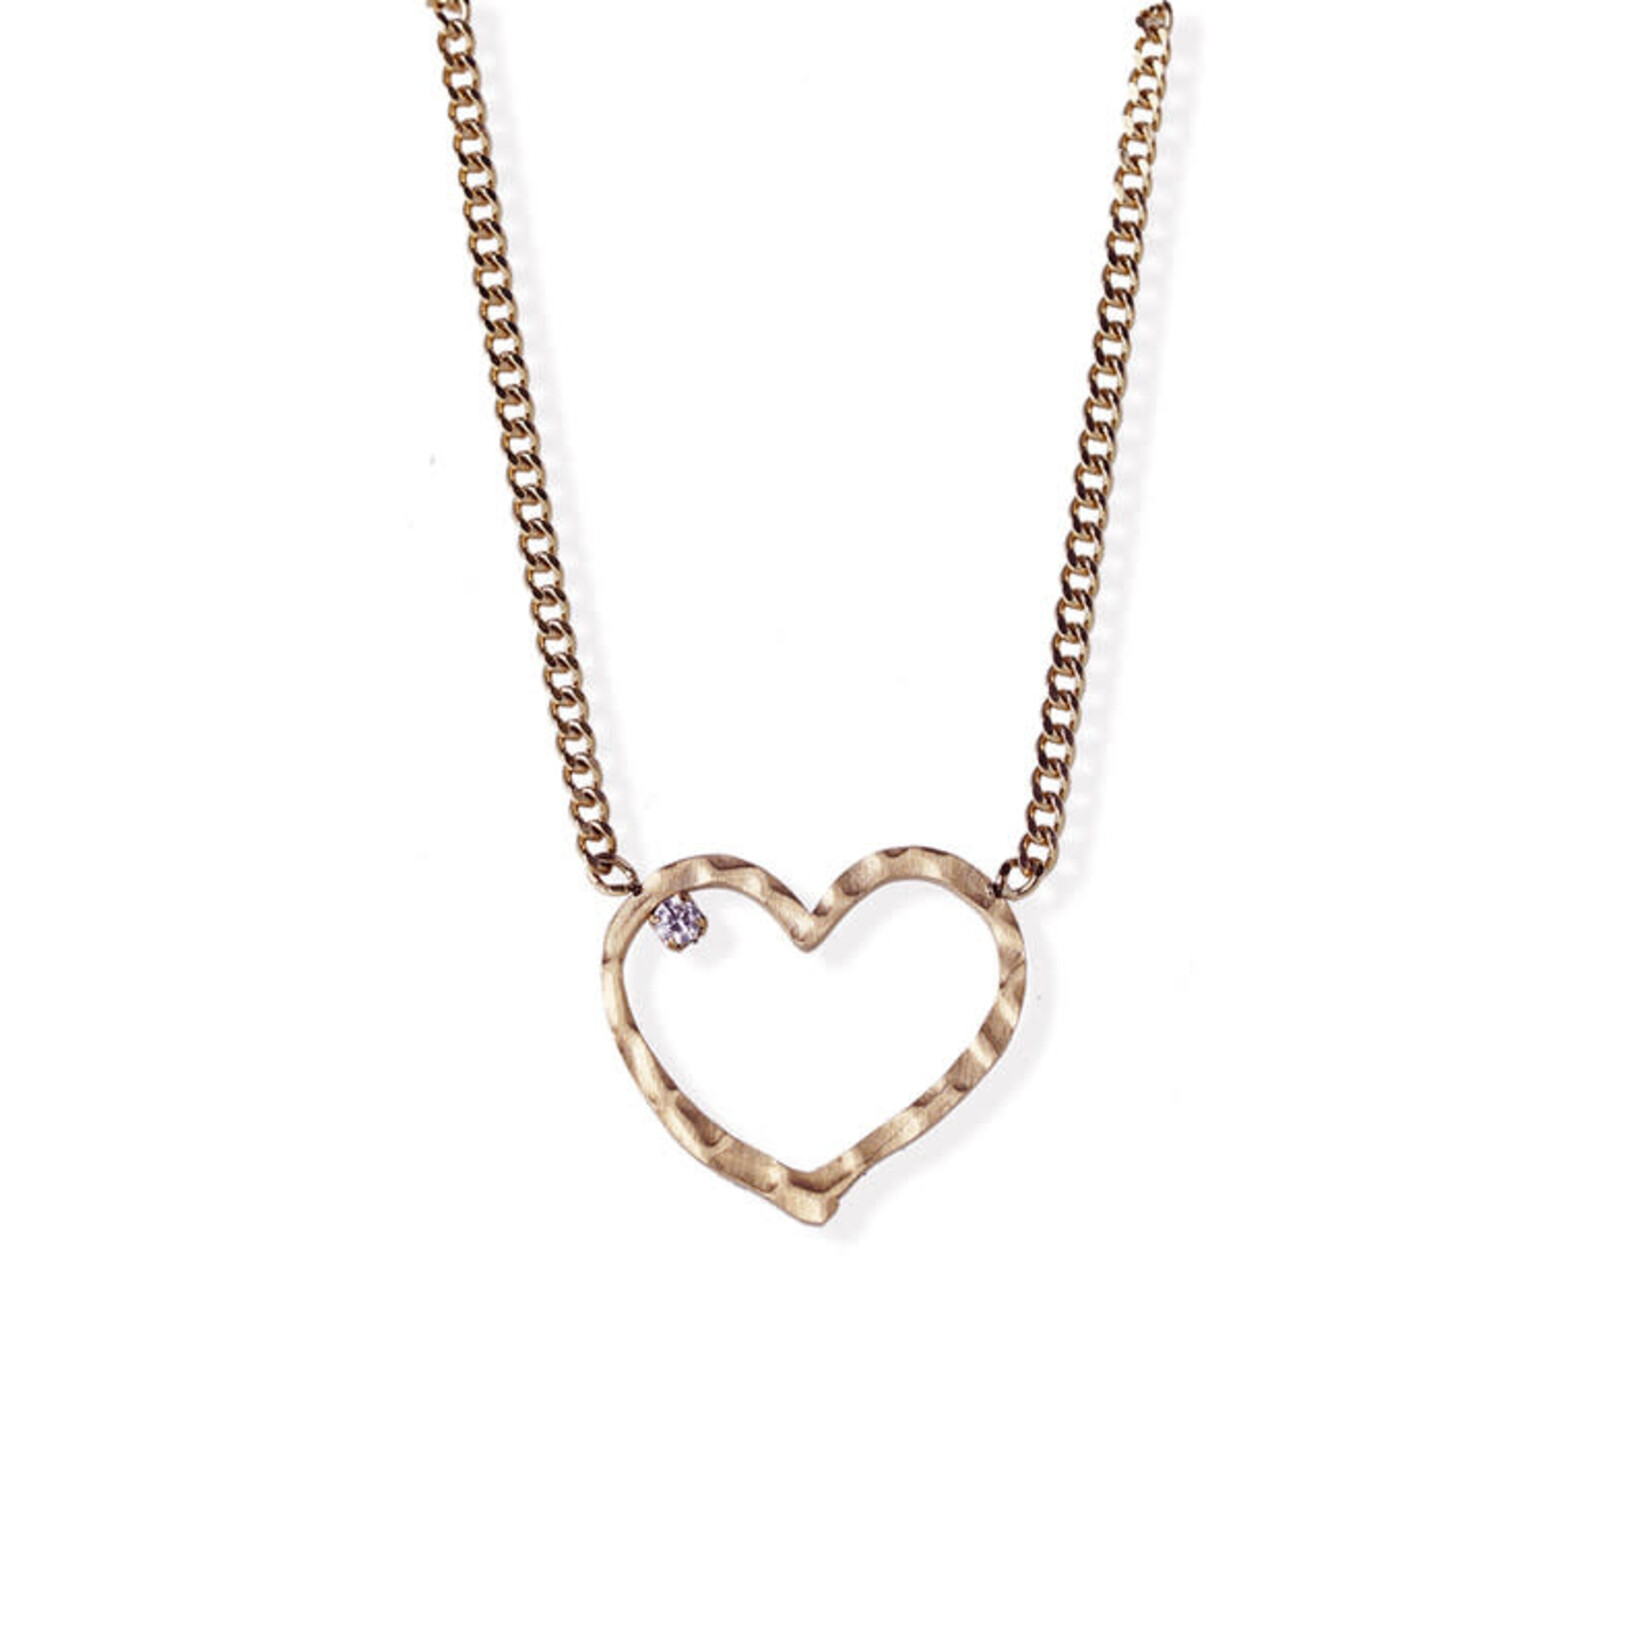 FAB Accessories Hammered Heart Necklace -